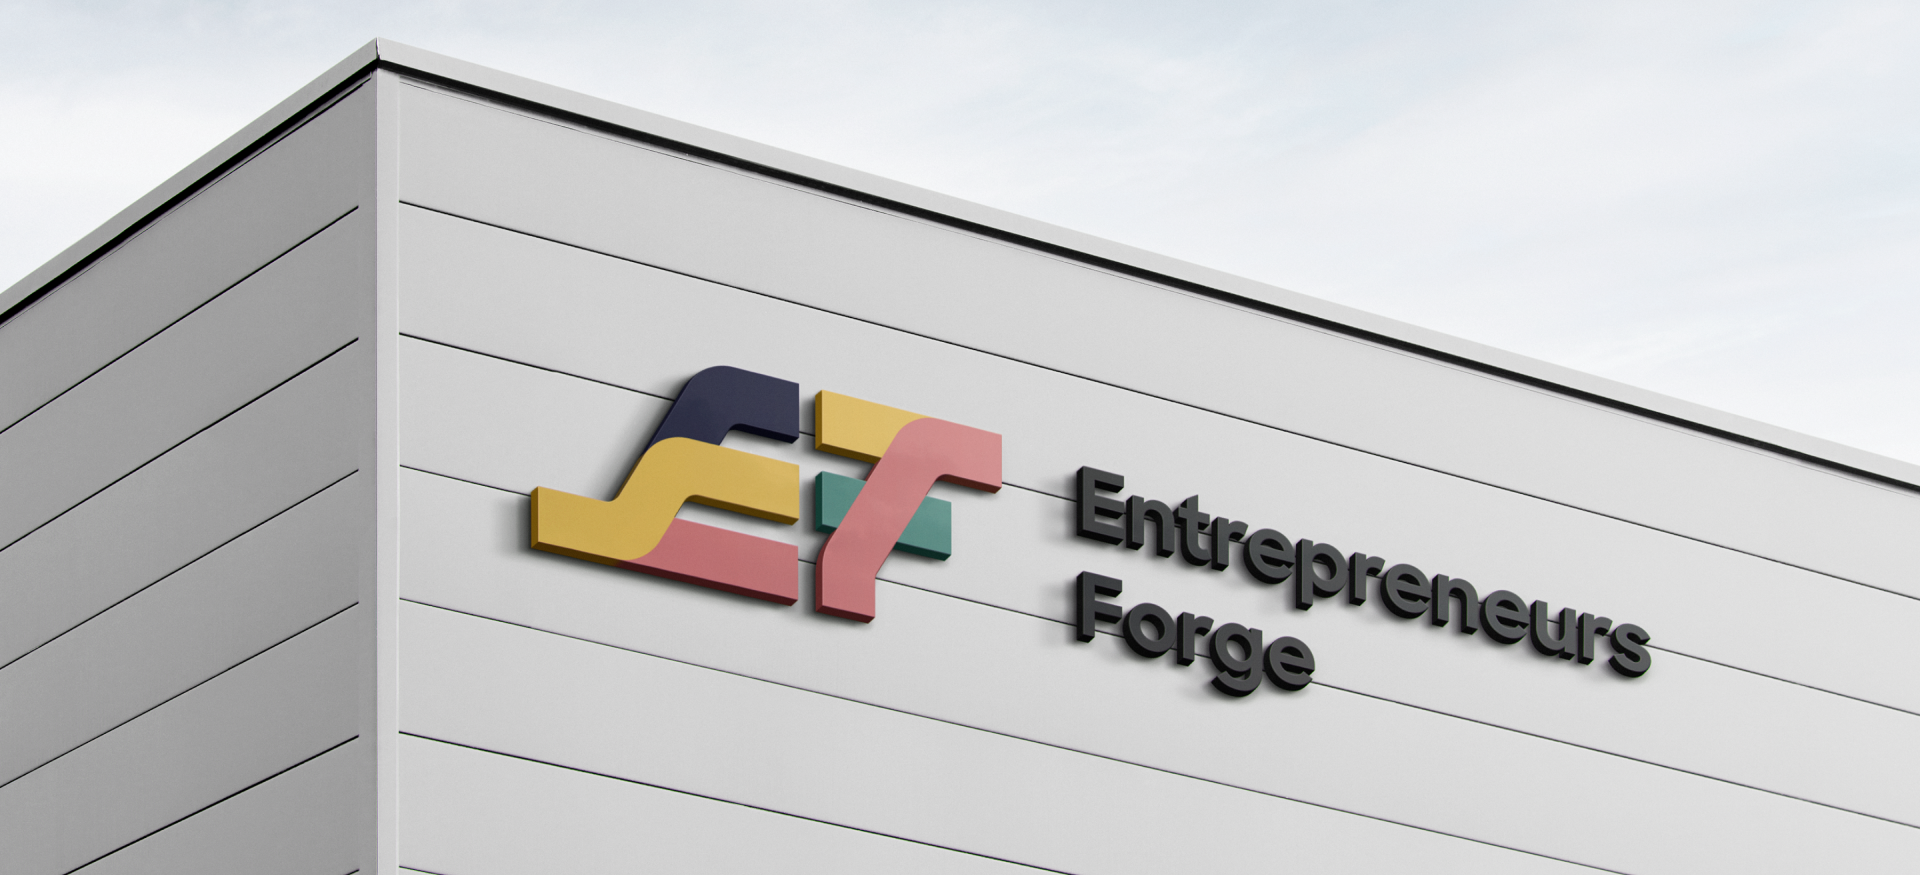 Building that has the Entrepreneurs Forge logo design on it